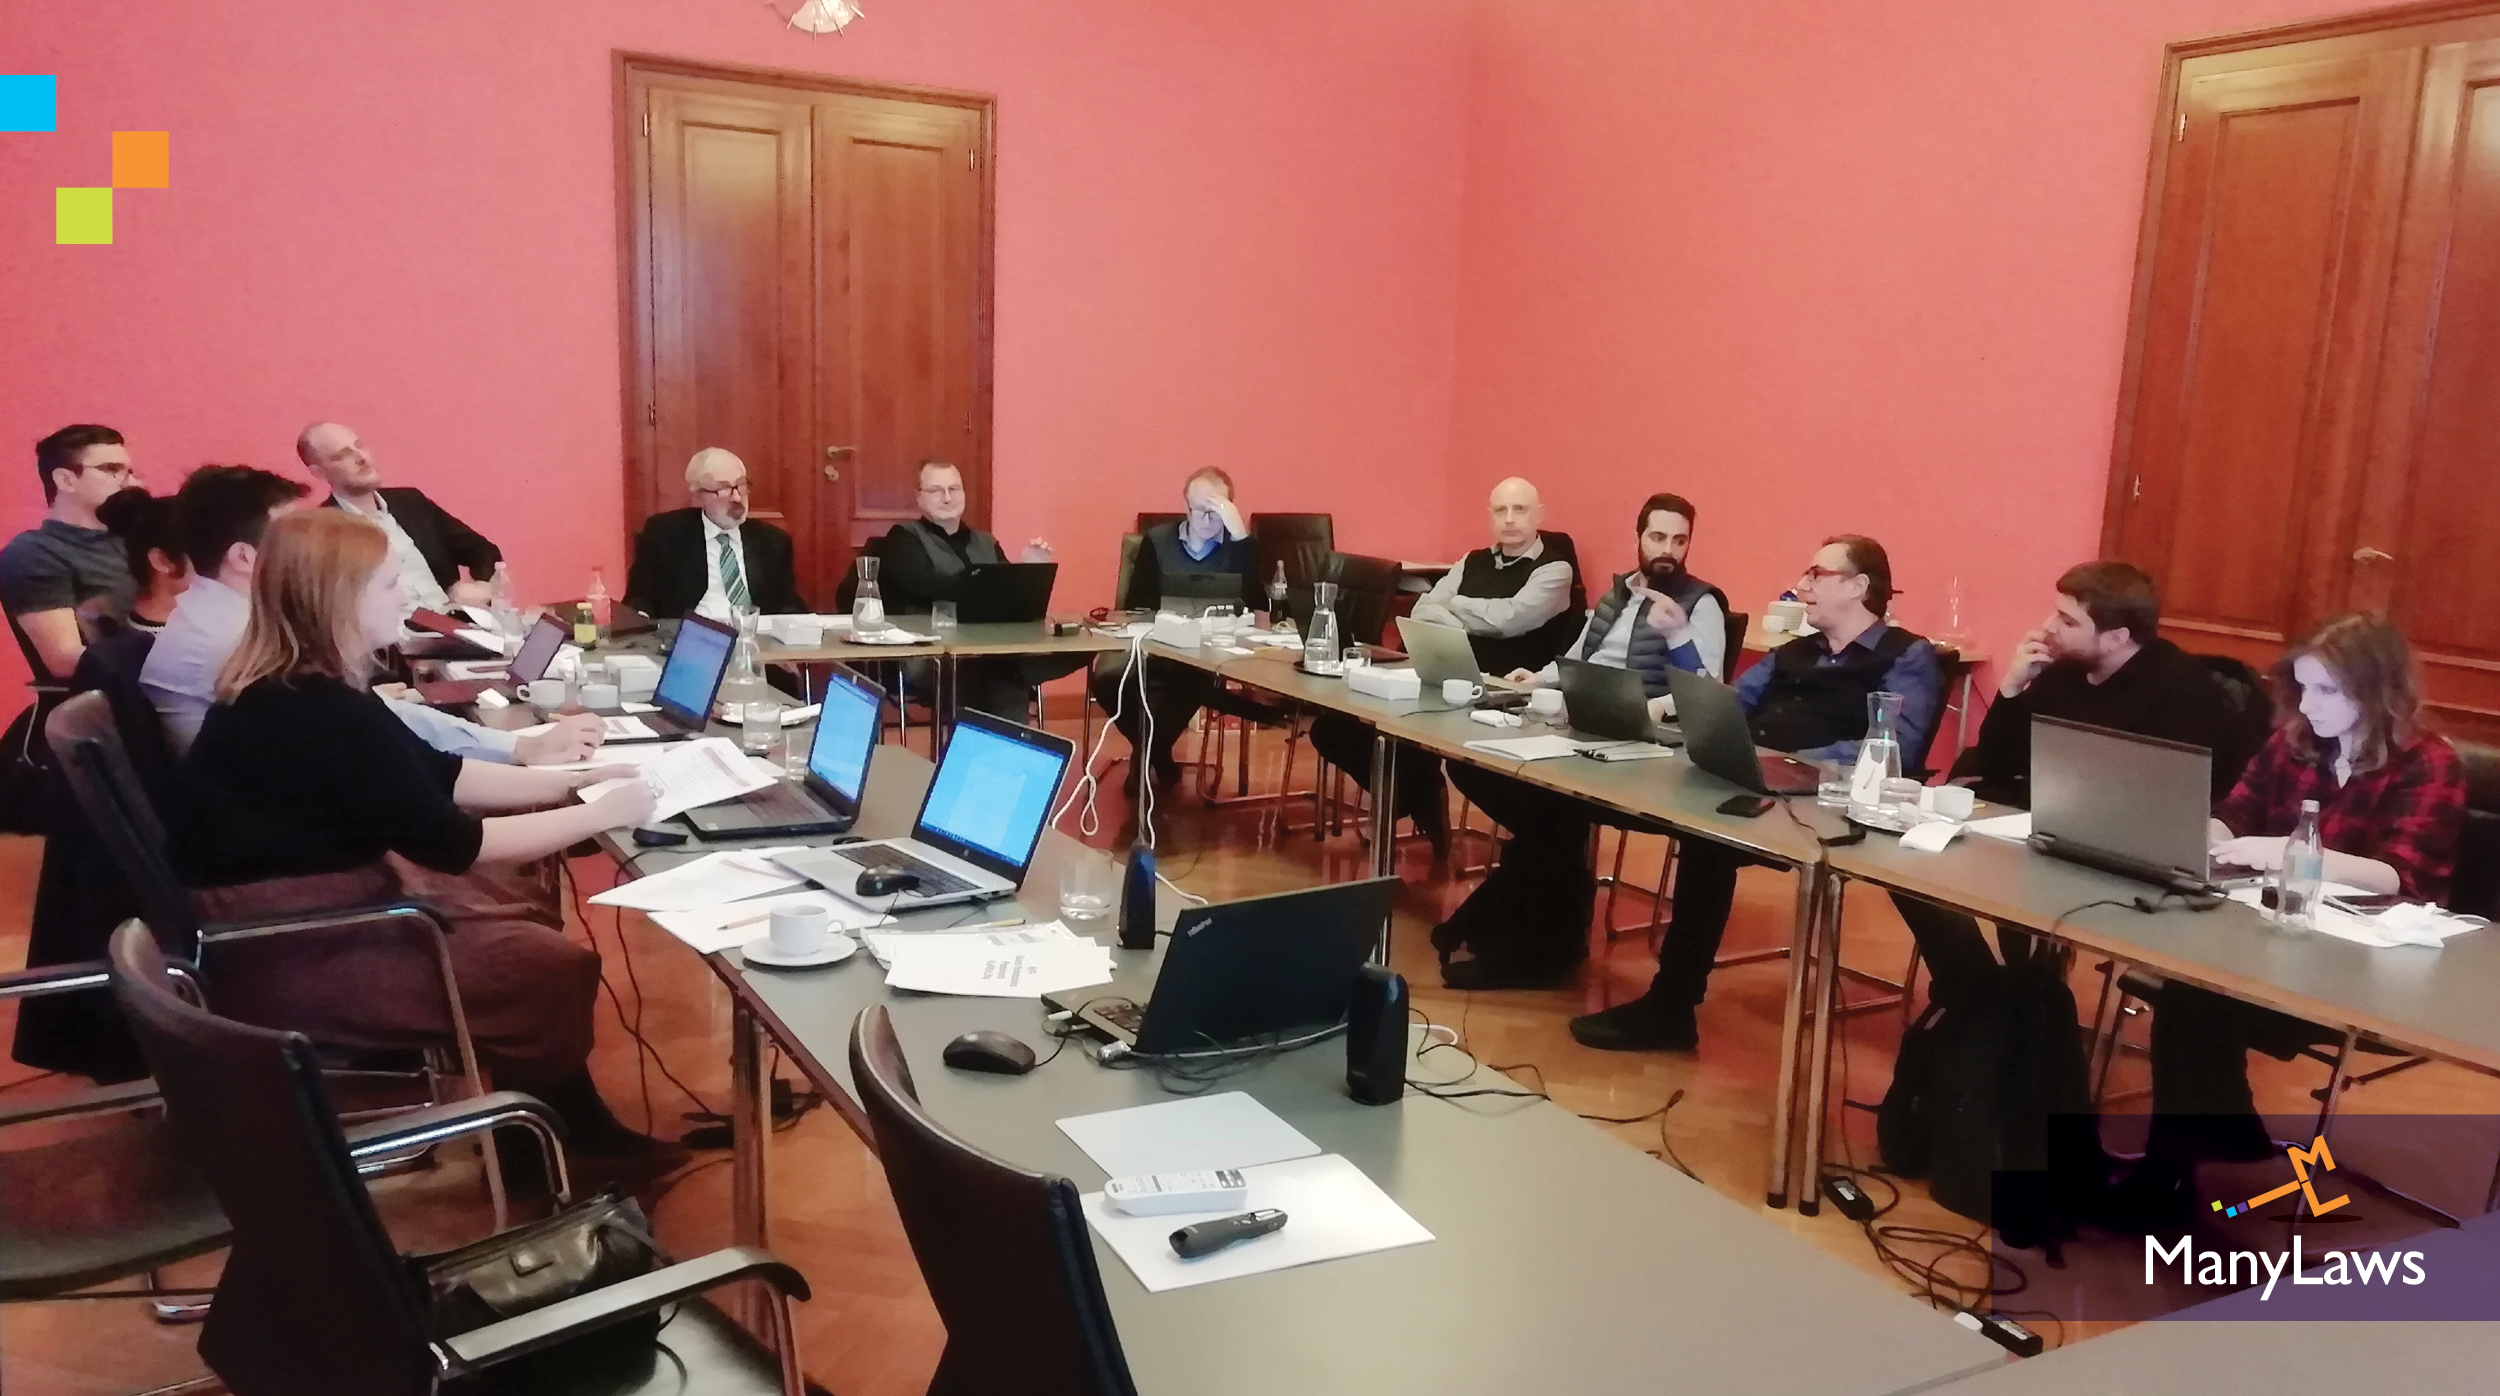 The ManyLaws Plenary and Technical Meeting in Vienna, Austria